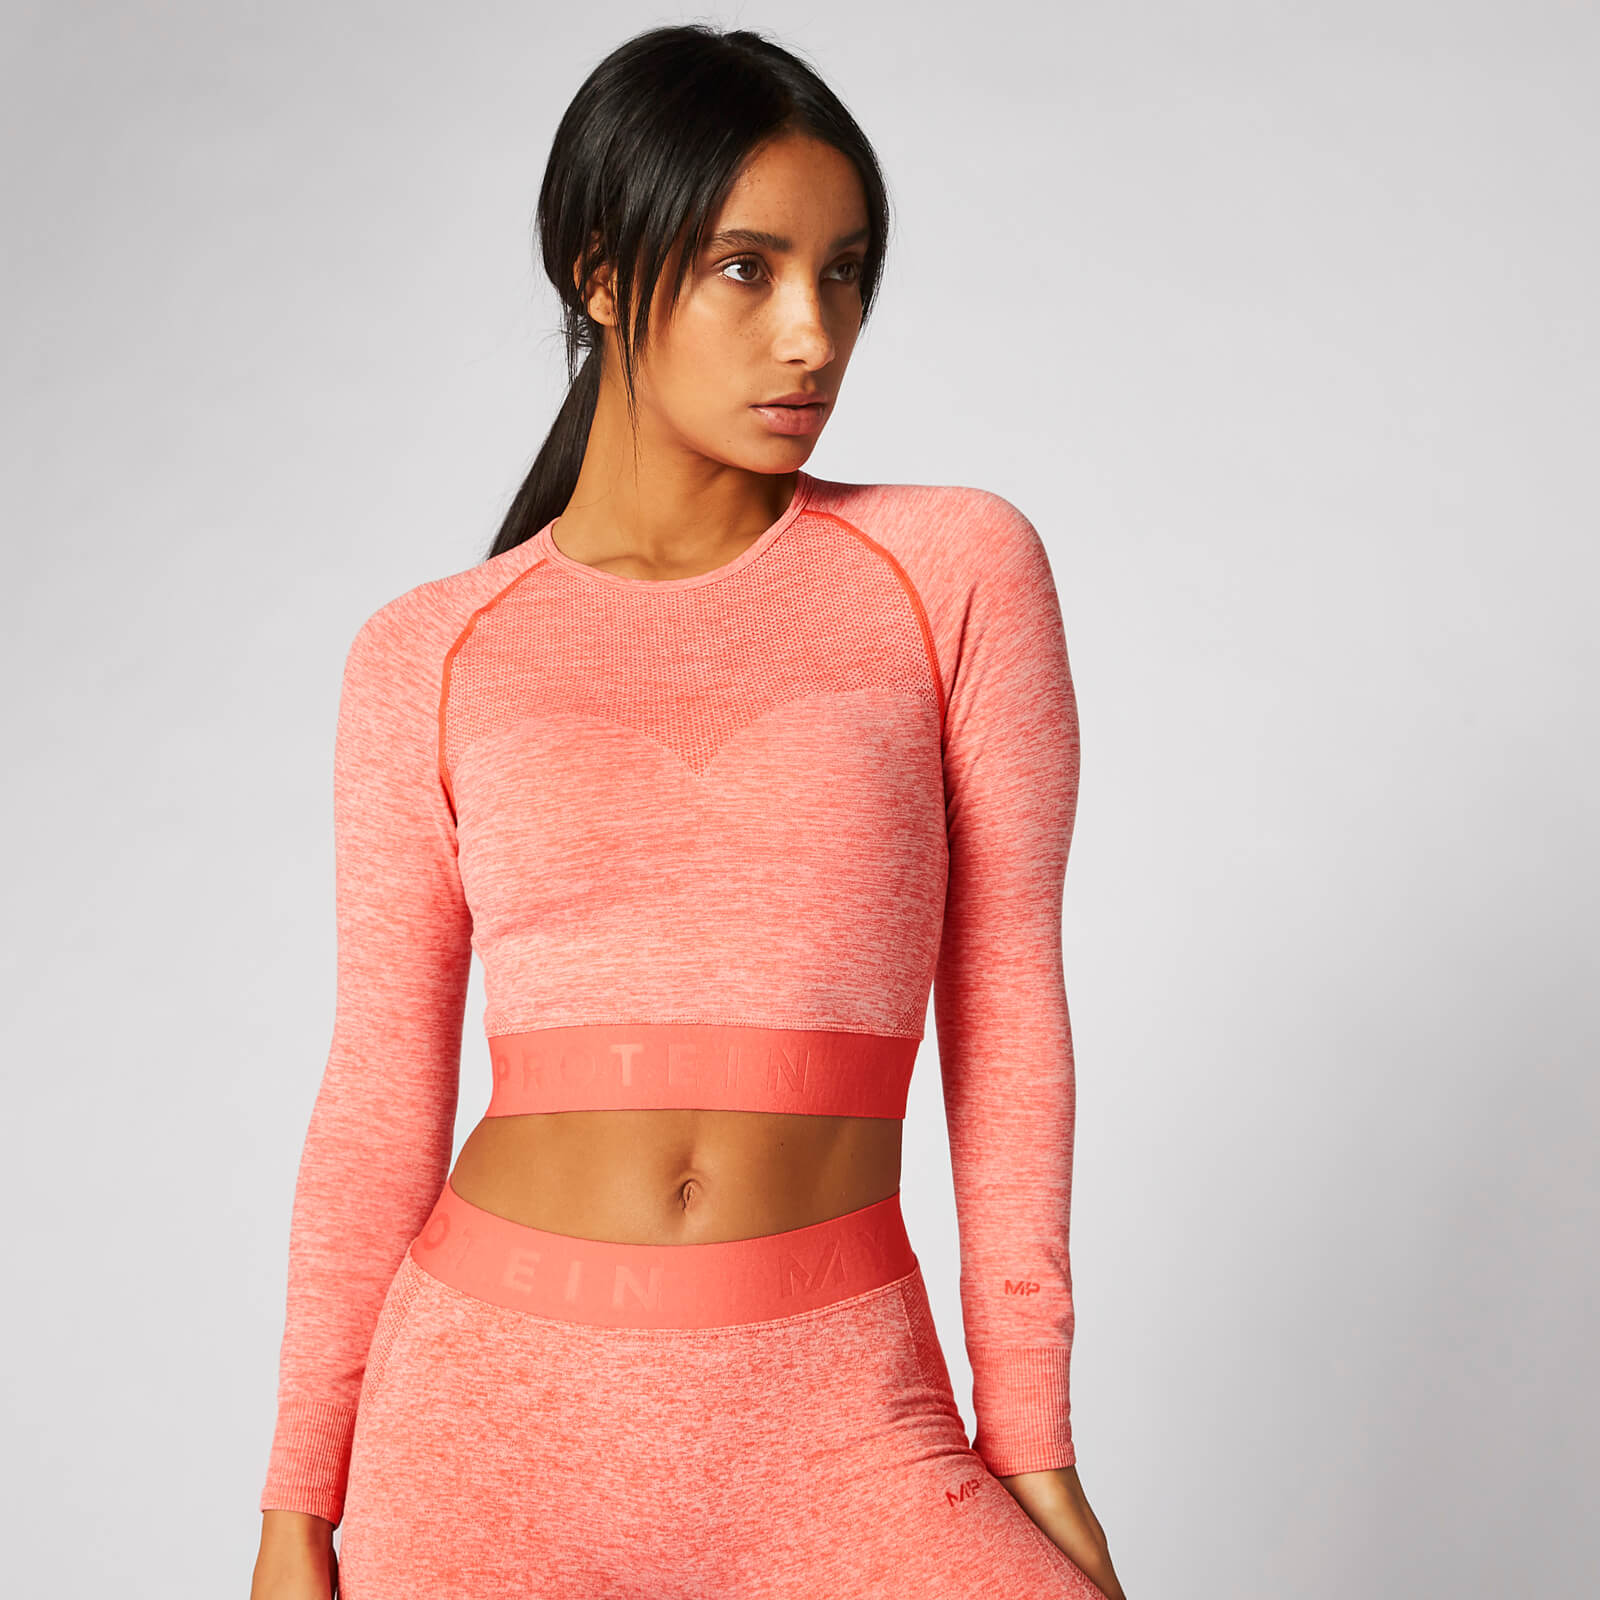 MP Inspire Seamless Crop Top - Hot Coral - S